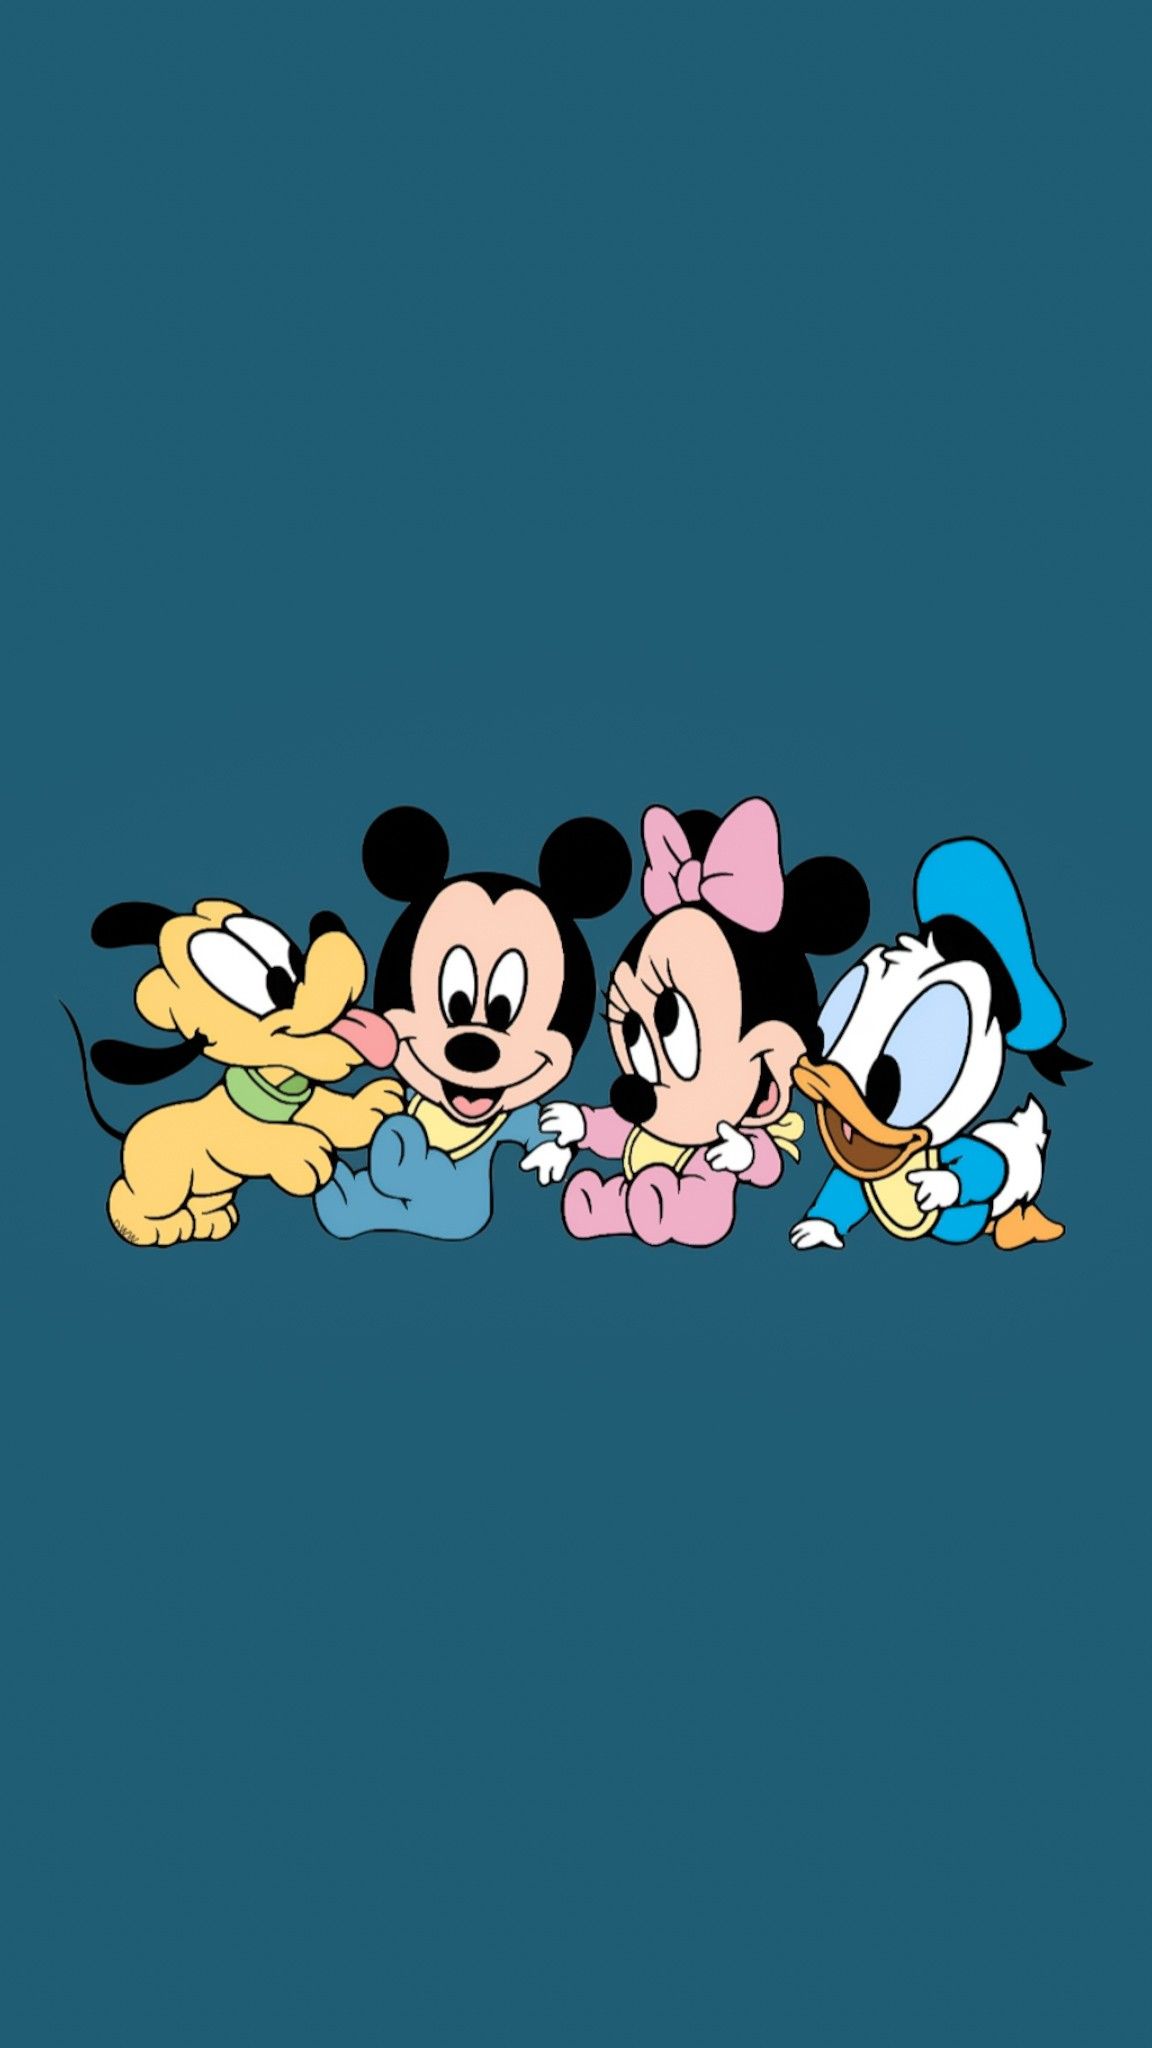 Mickey And Friends BG. Disney characters wallpaper, Cute cartoon wallpaper, Disney wallpaper